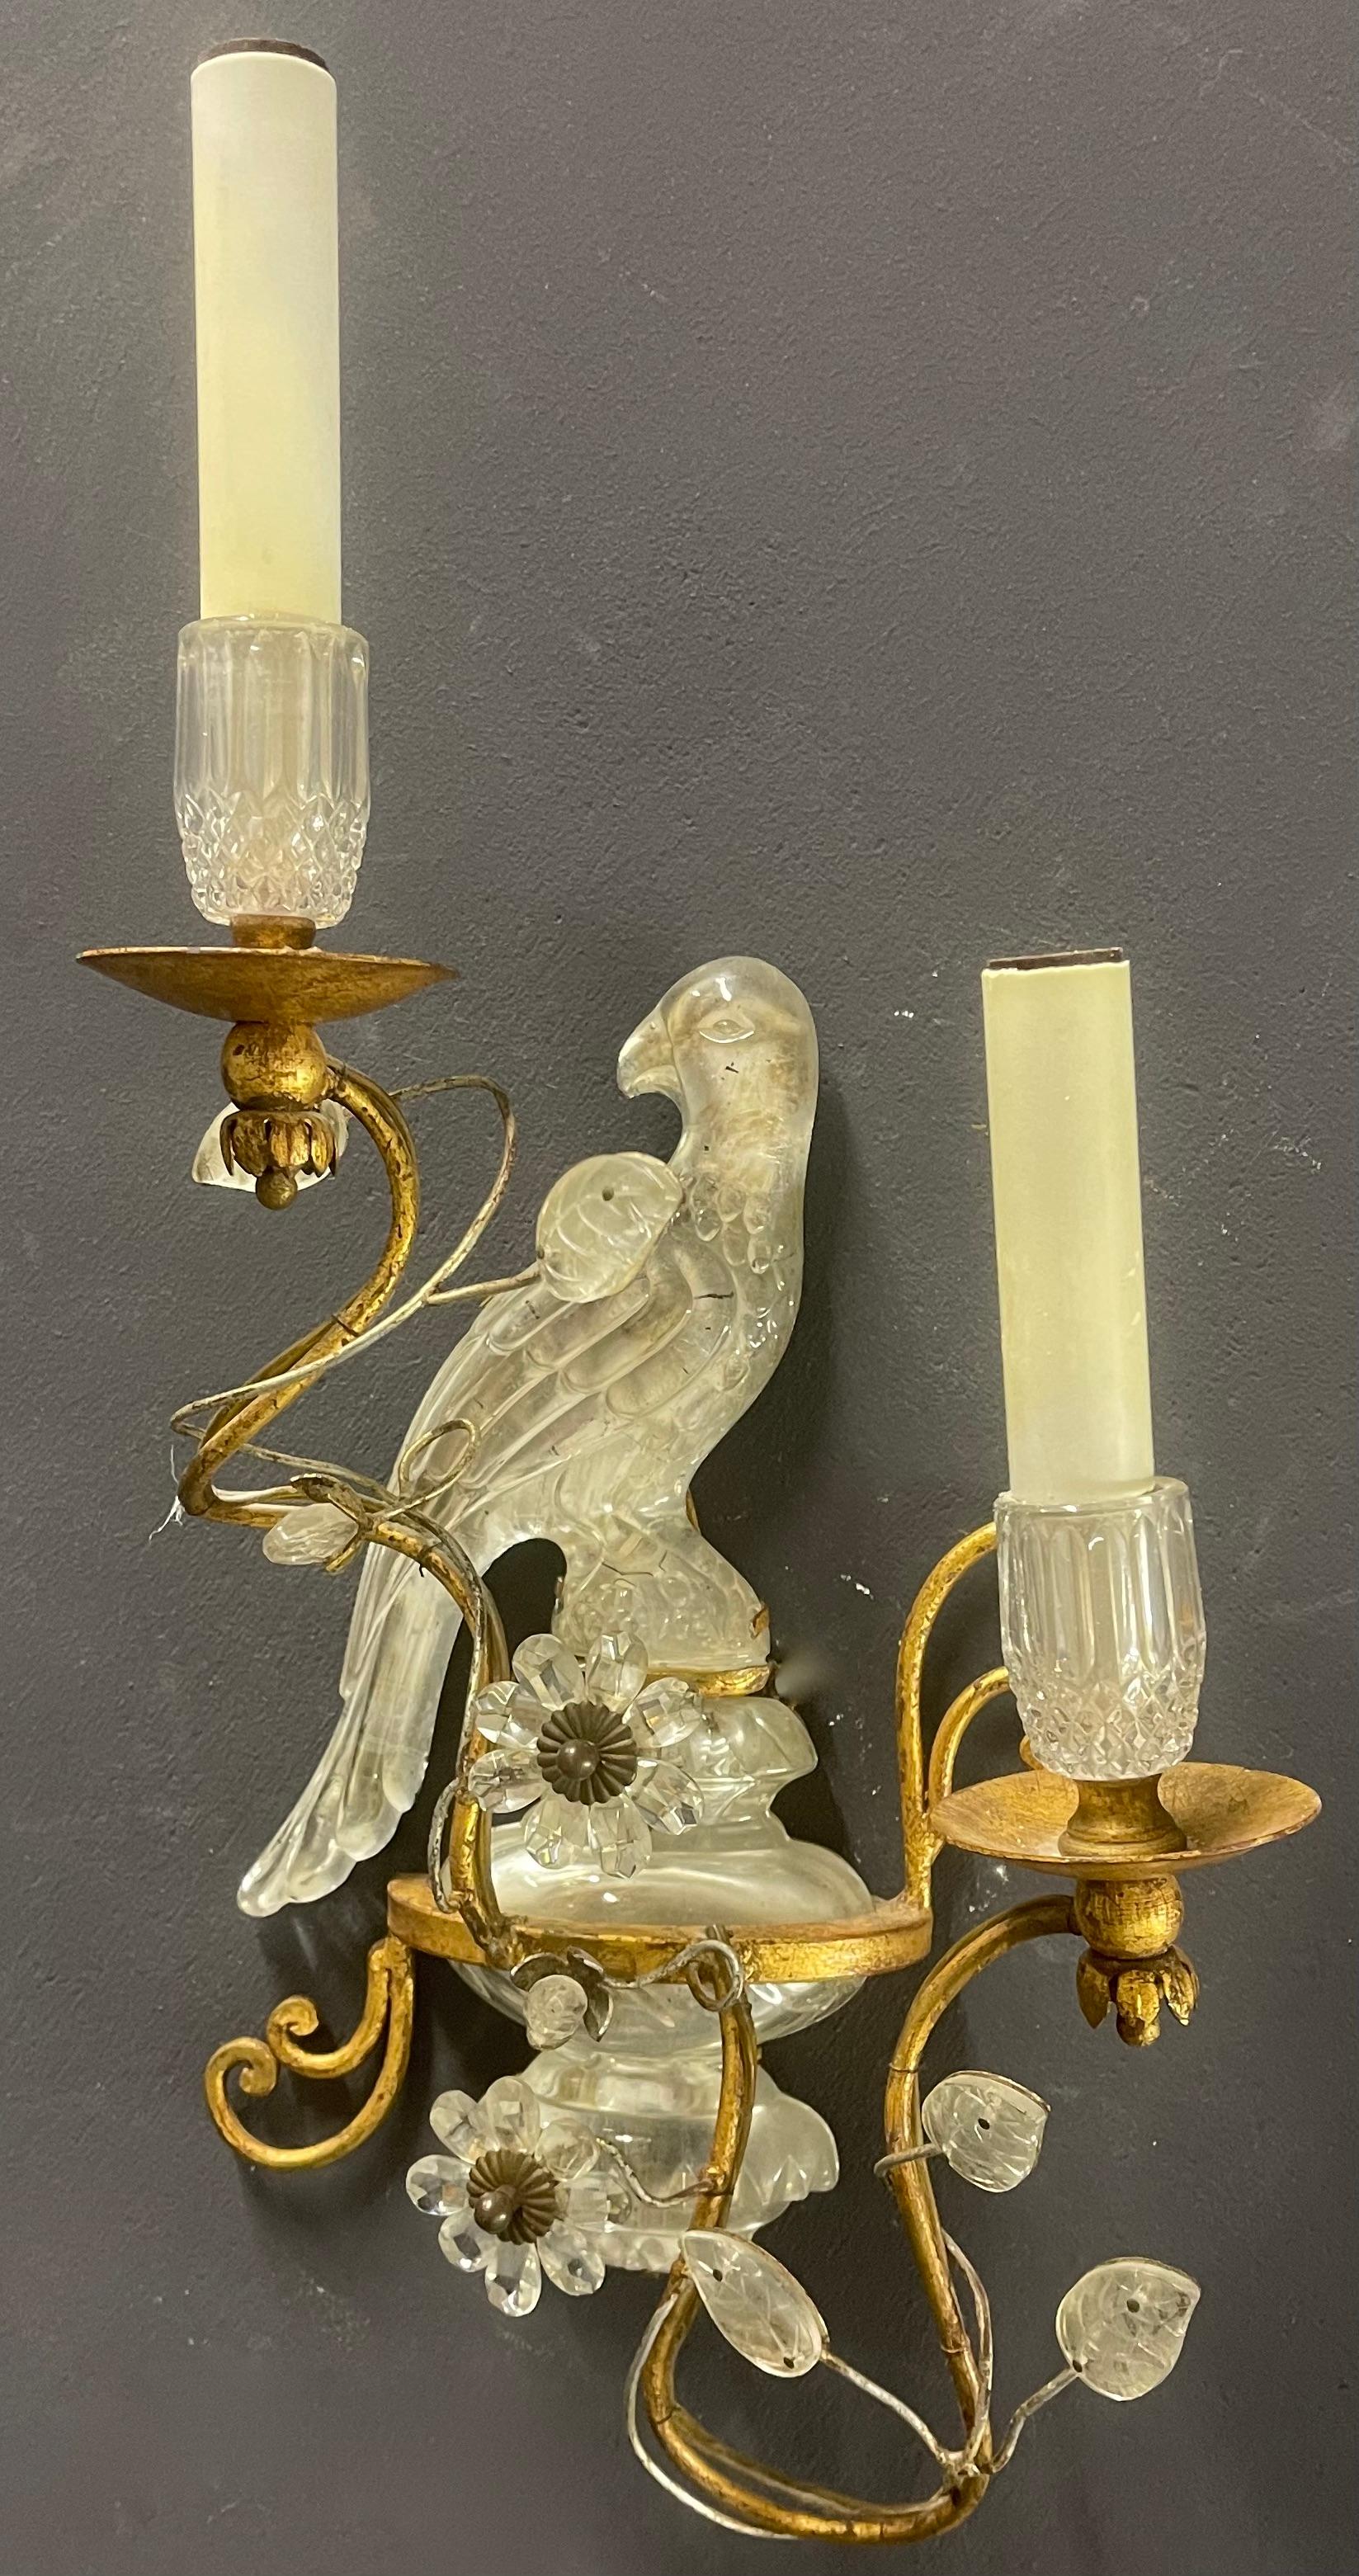 Crystal glass and gilded iron in very good condition. a matching pair is also available.